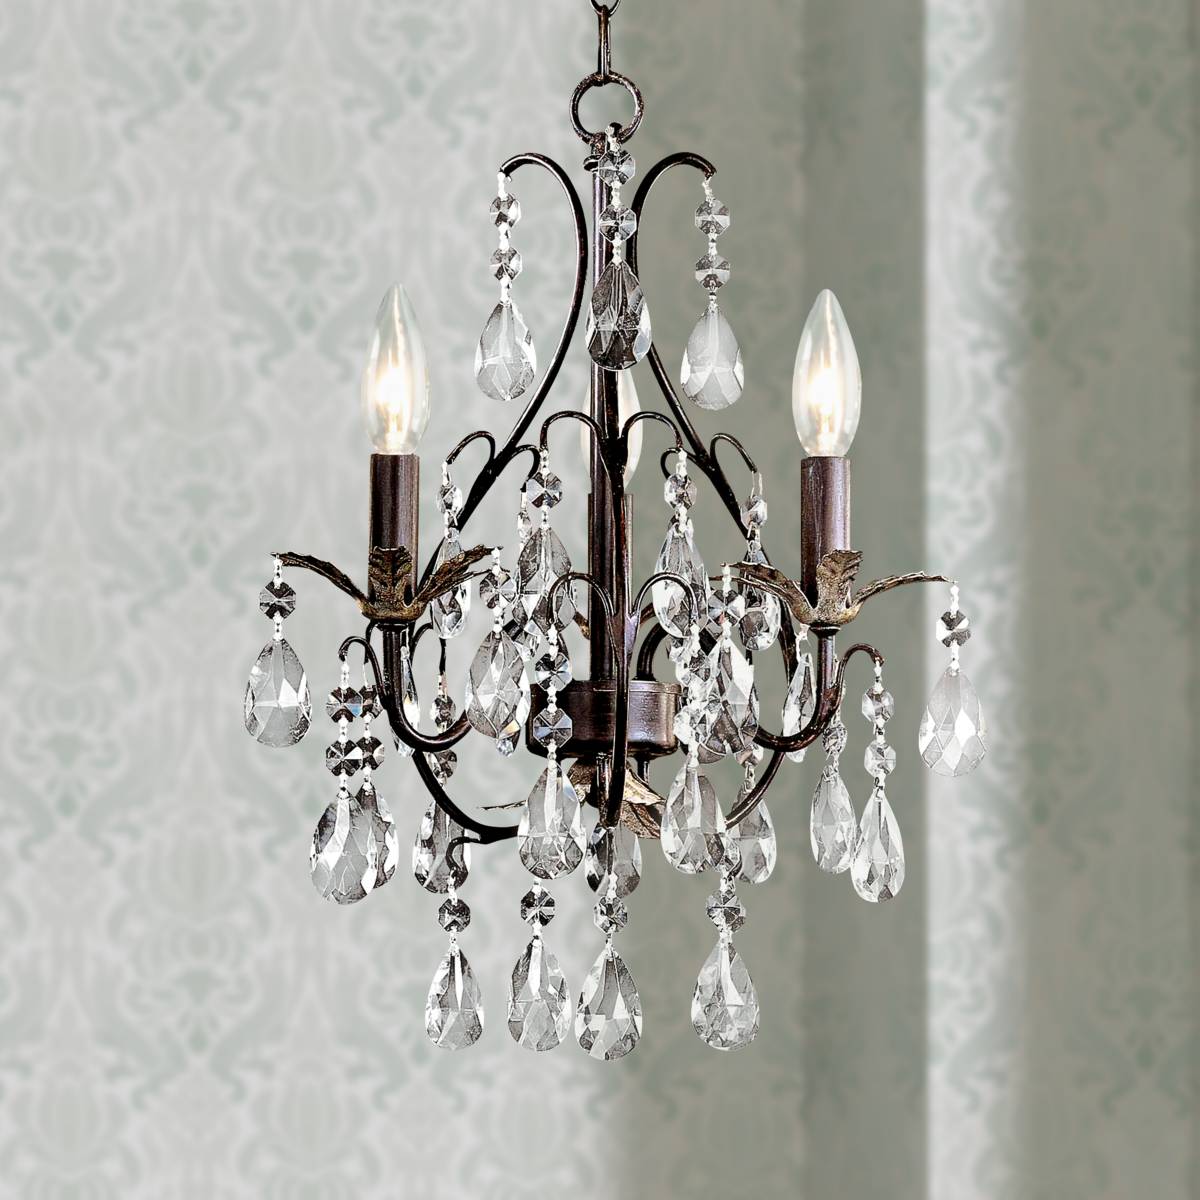 Mini Chandeliers Luxe Looks For The Bedroom Bathrooms Closet And More Lamps Plus